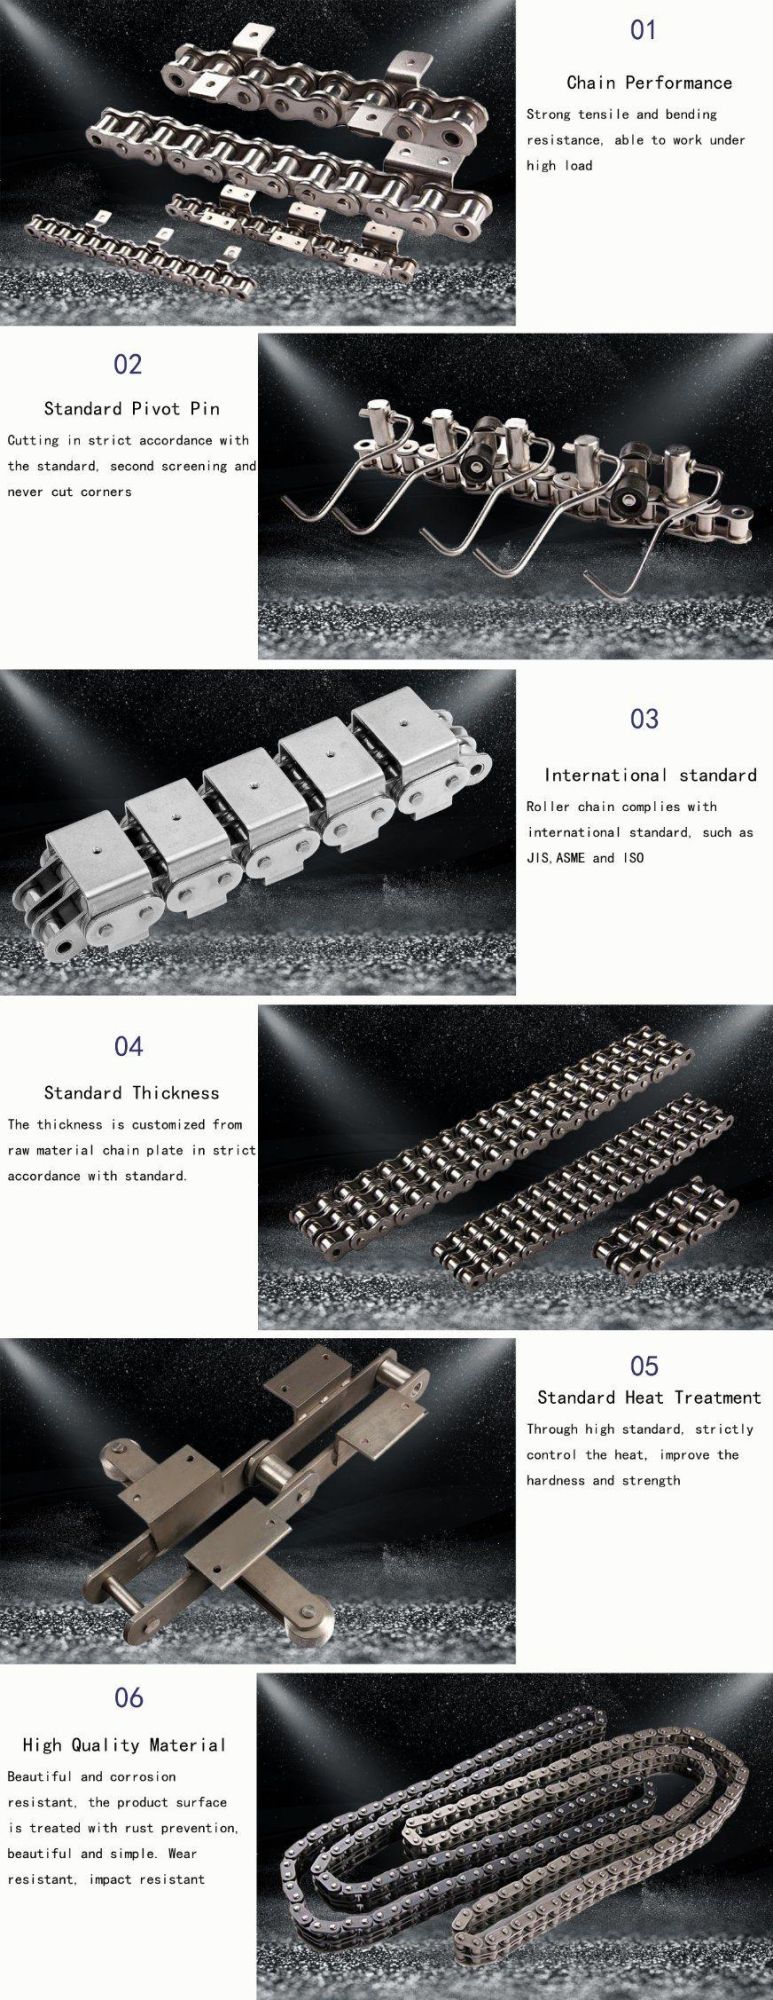 Industrial Conveyor Chain DIN Standard Double Pitch Conveyor Roller Chain C2102h with Attachments SA1 & SA2 & Sk1 & Sk2